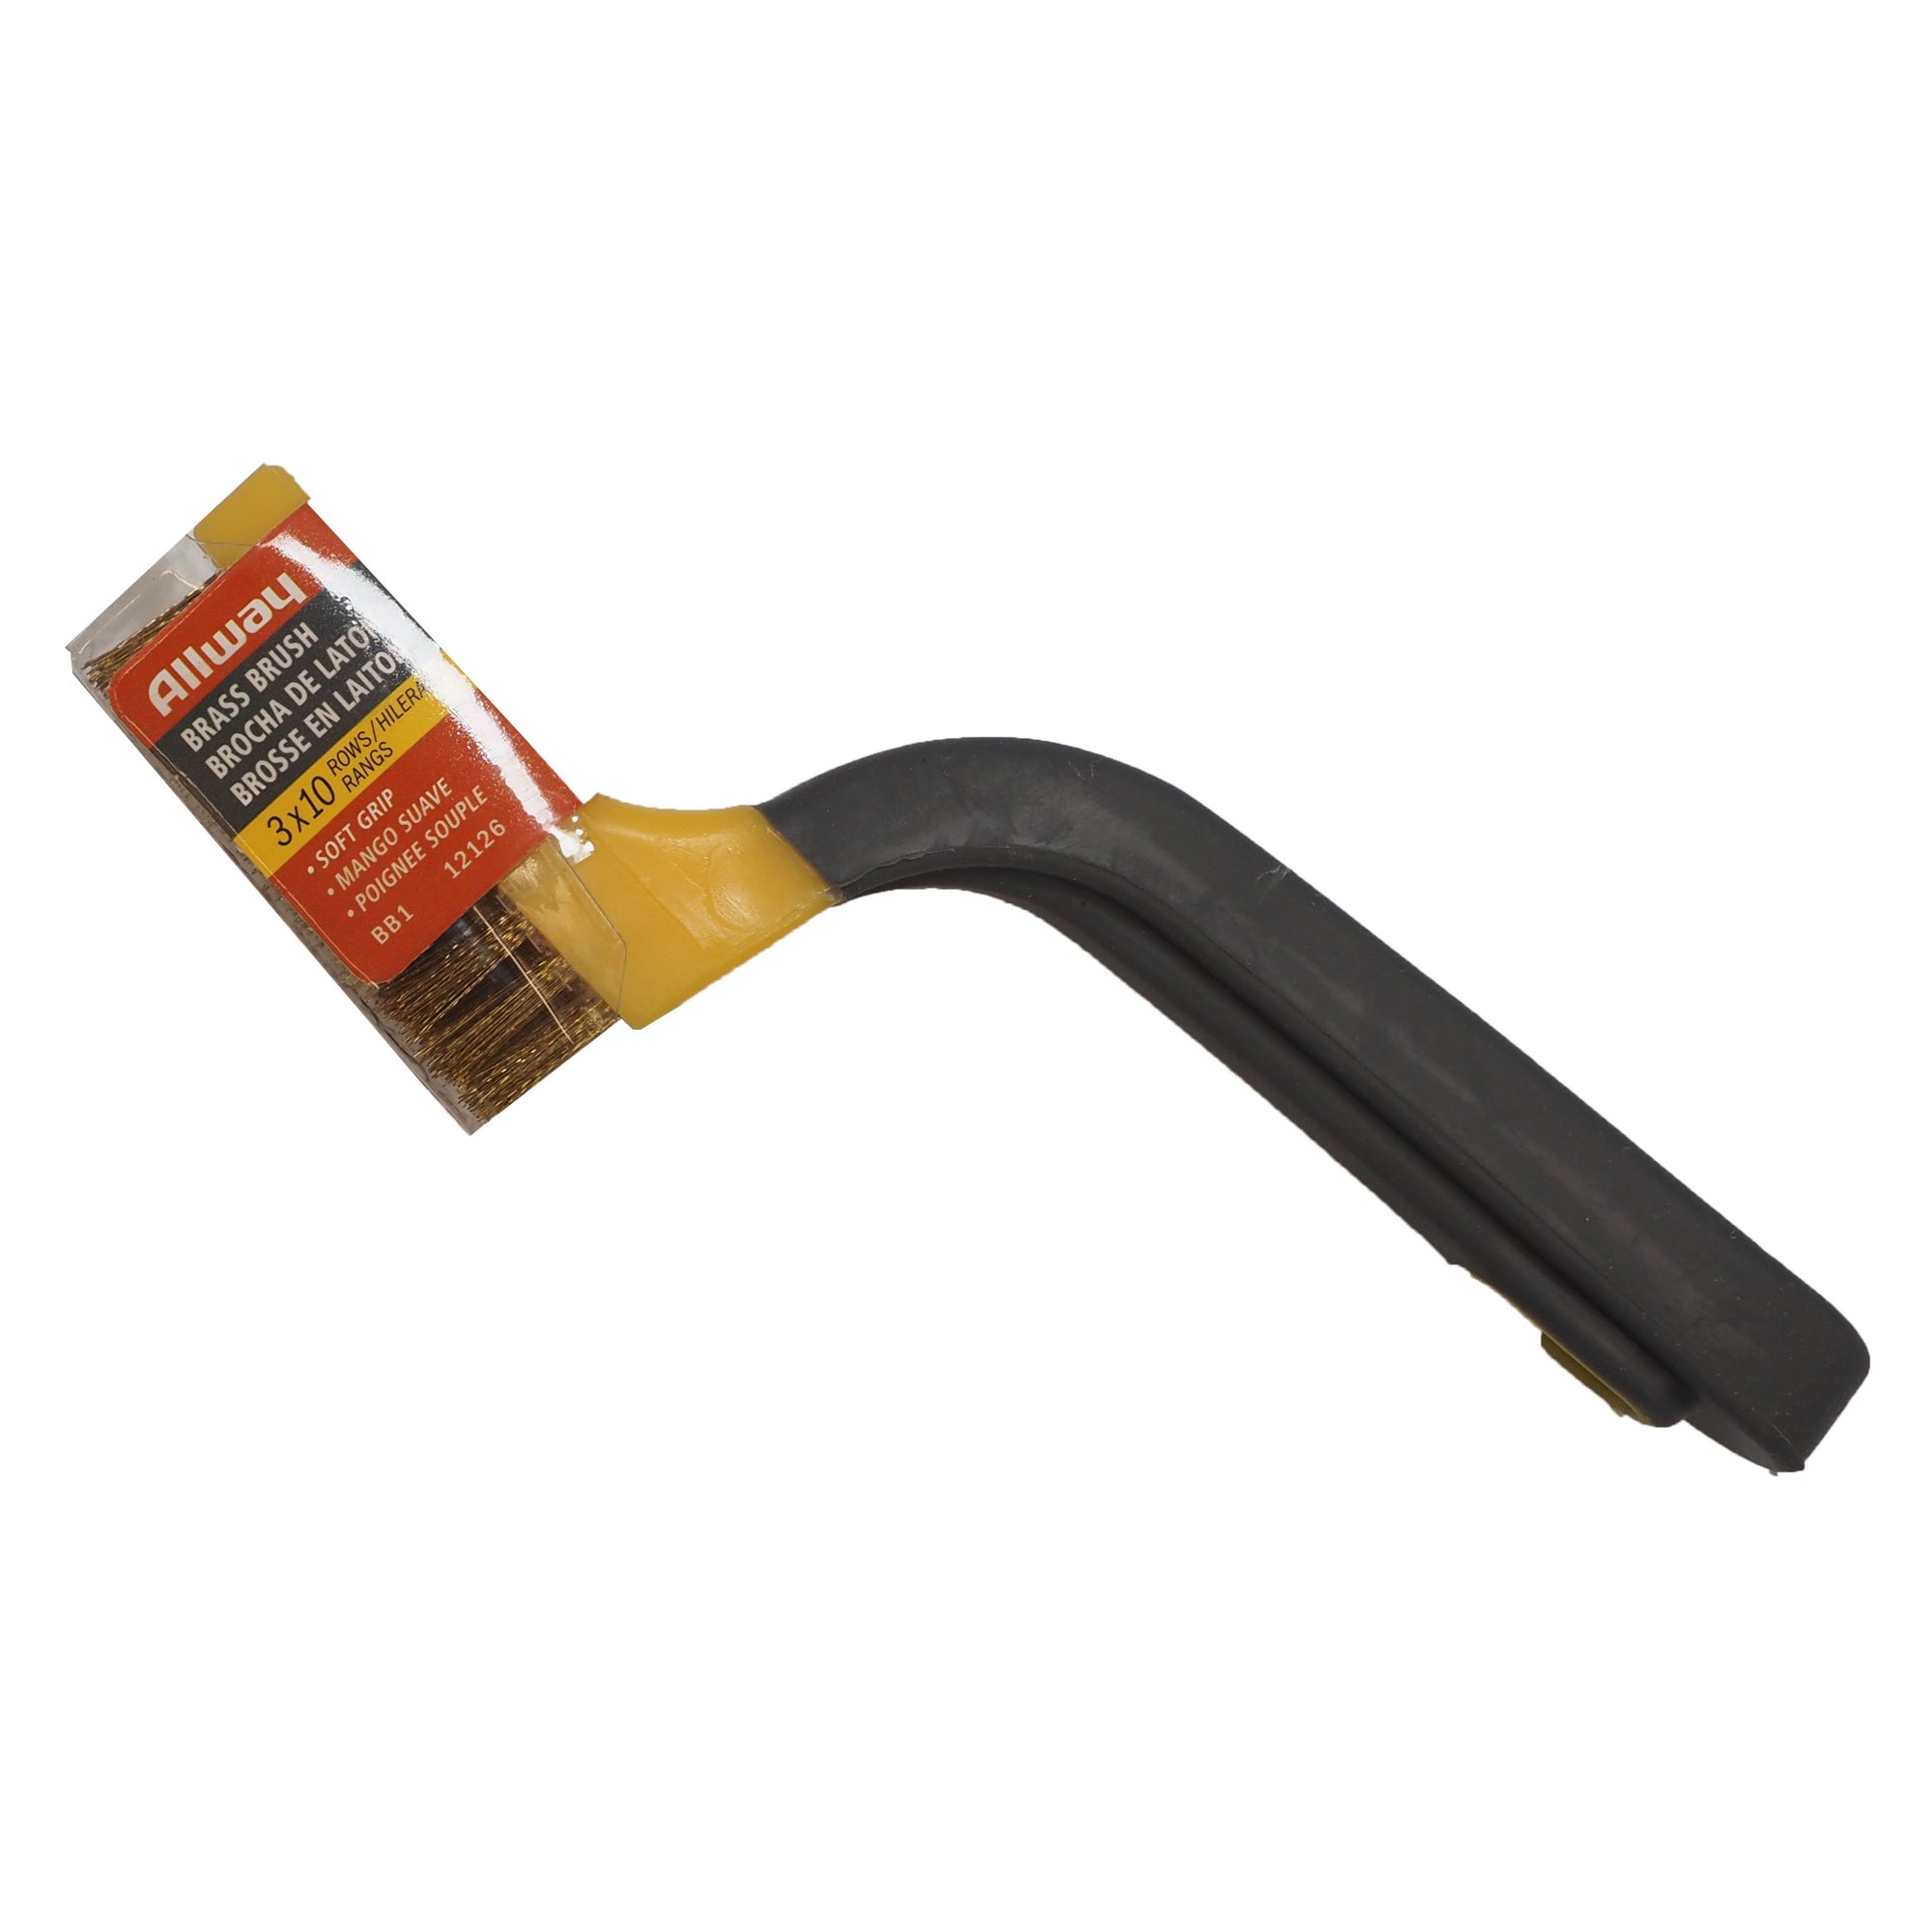 Allway brass mini scraping brush, available at Catalina Paints in CA.